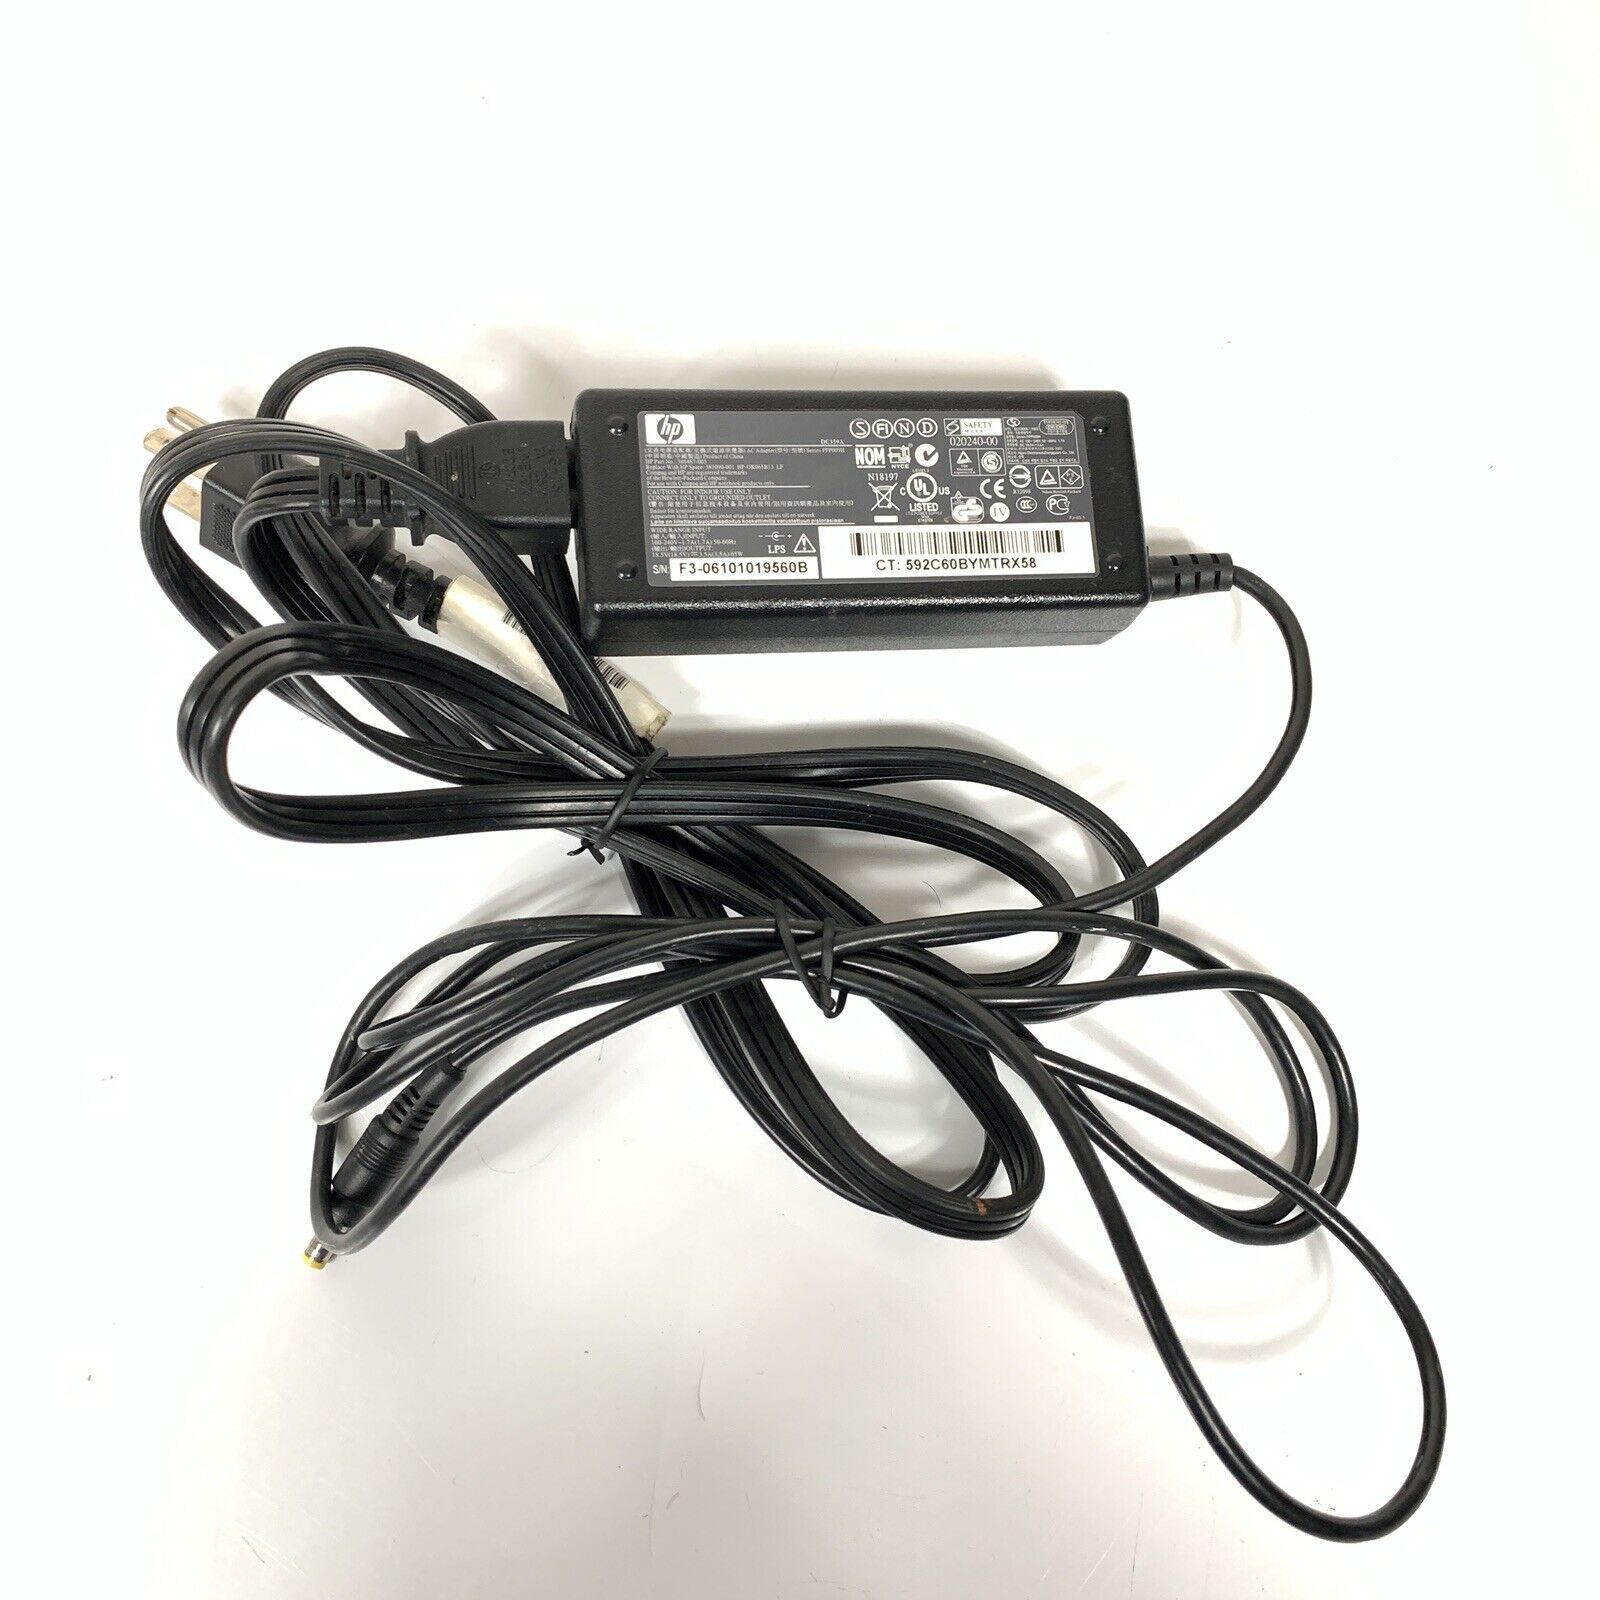 Genuine OEM HP 18.5V 3.5A 65W AC Charger for HP/Compaq DC359A